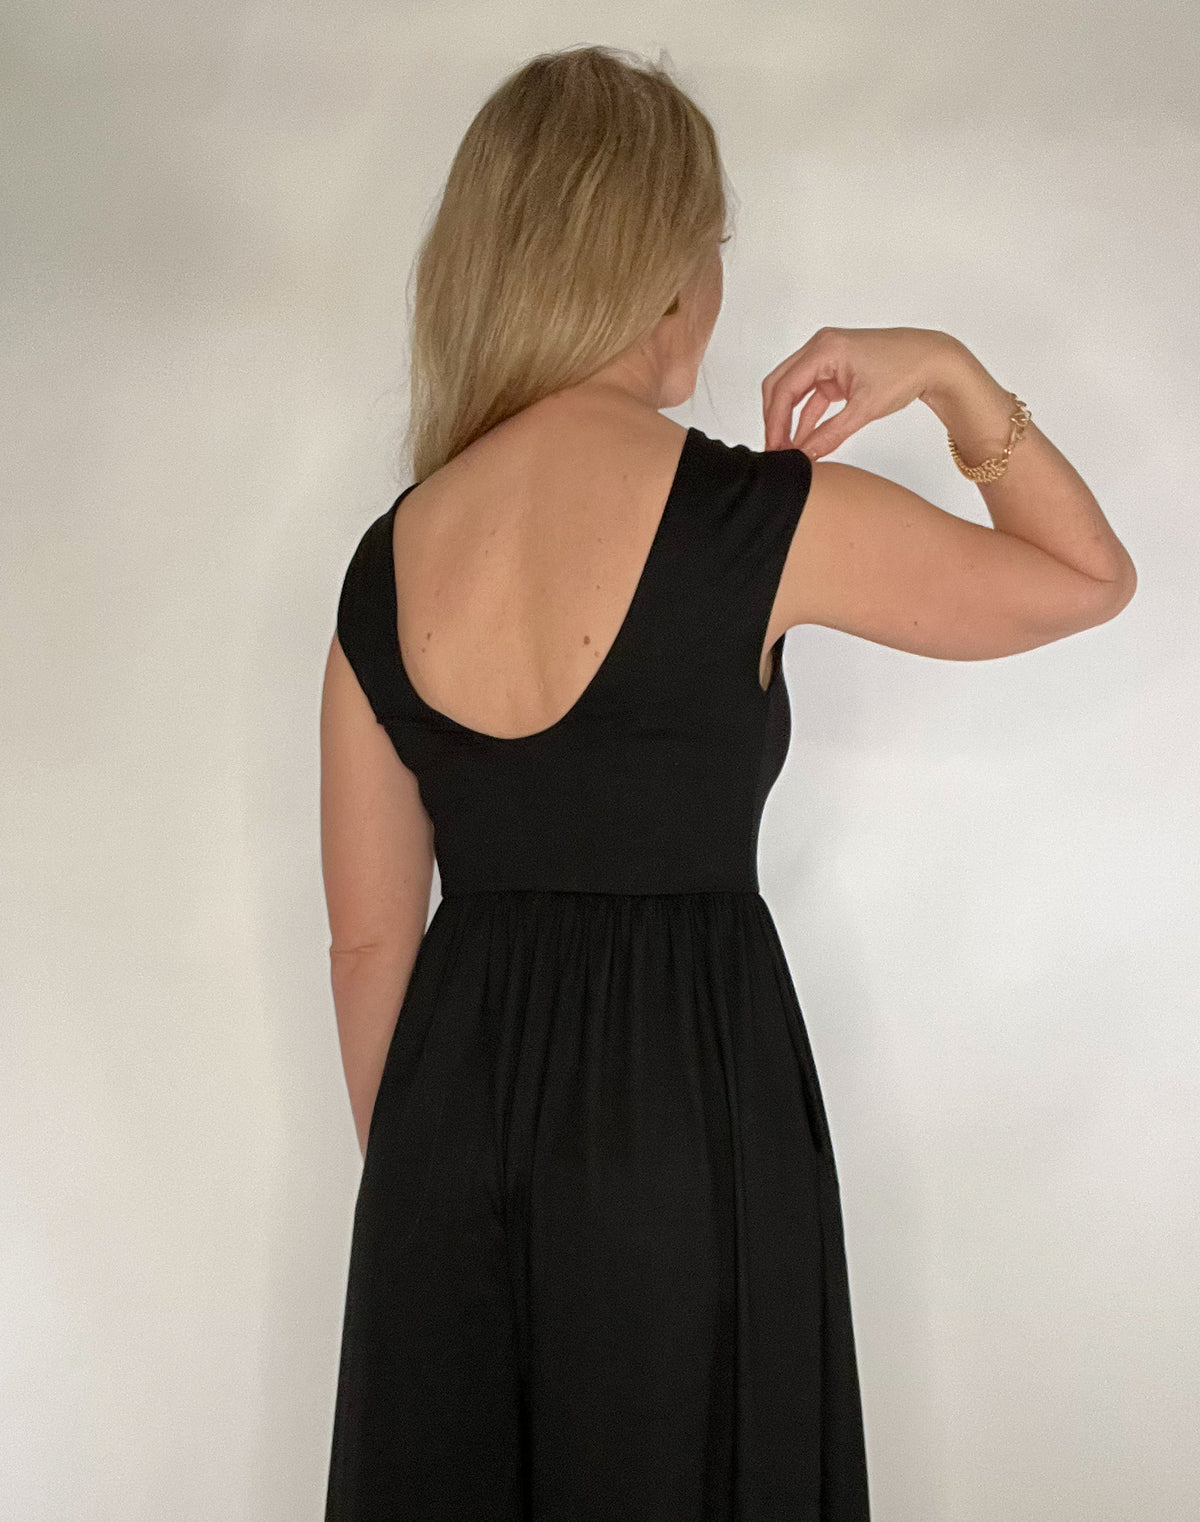 The Illusive Jumper is a versatile and comfortable piece that combines the elegance of a dress with the convenience of a romper. Made with luxurious black jersey fabric, it features angled hem, pockets, and a low cut back with wide straps for bra support. The fitted bodice flares at the waist for a flattering silhouette. Elevate your style with this sophisticated and artful piece.